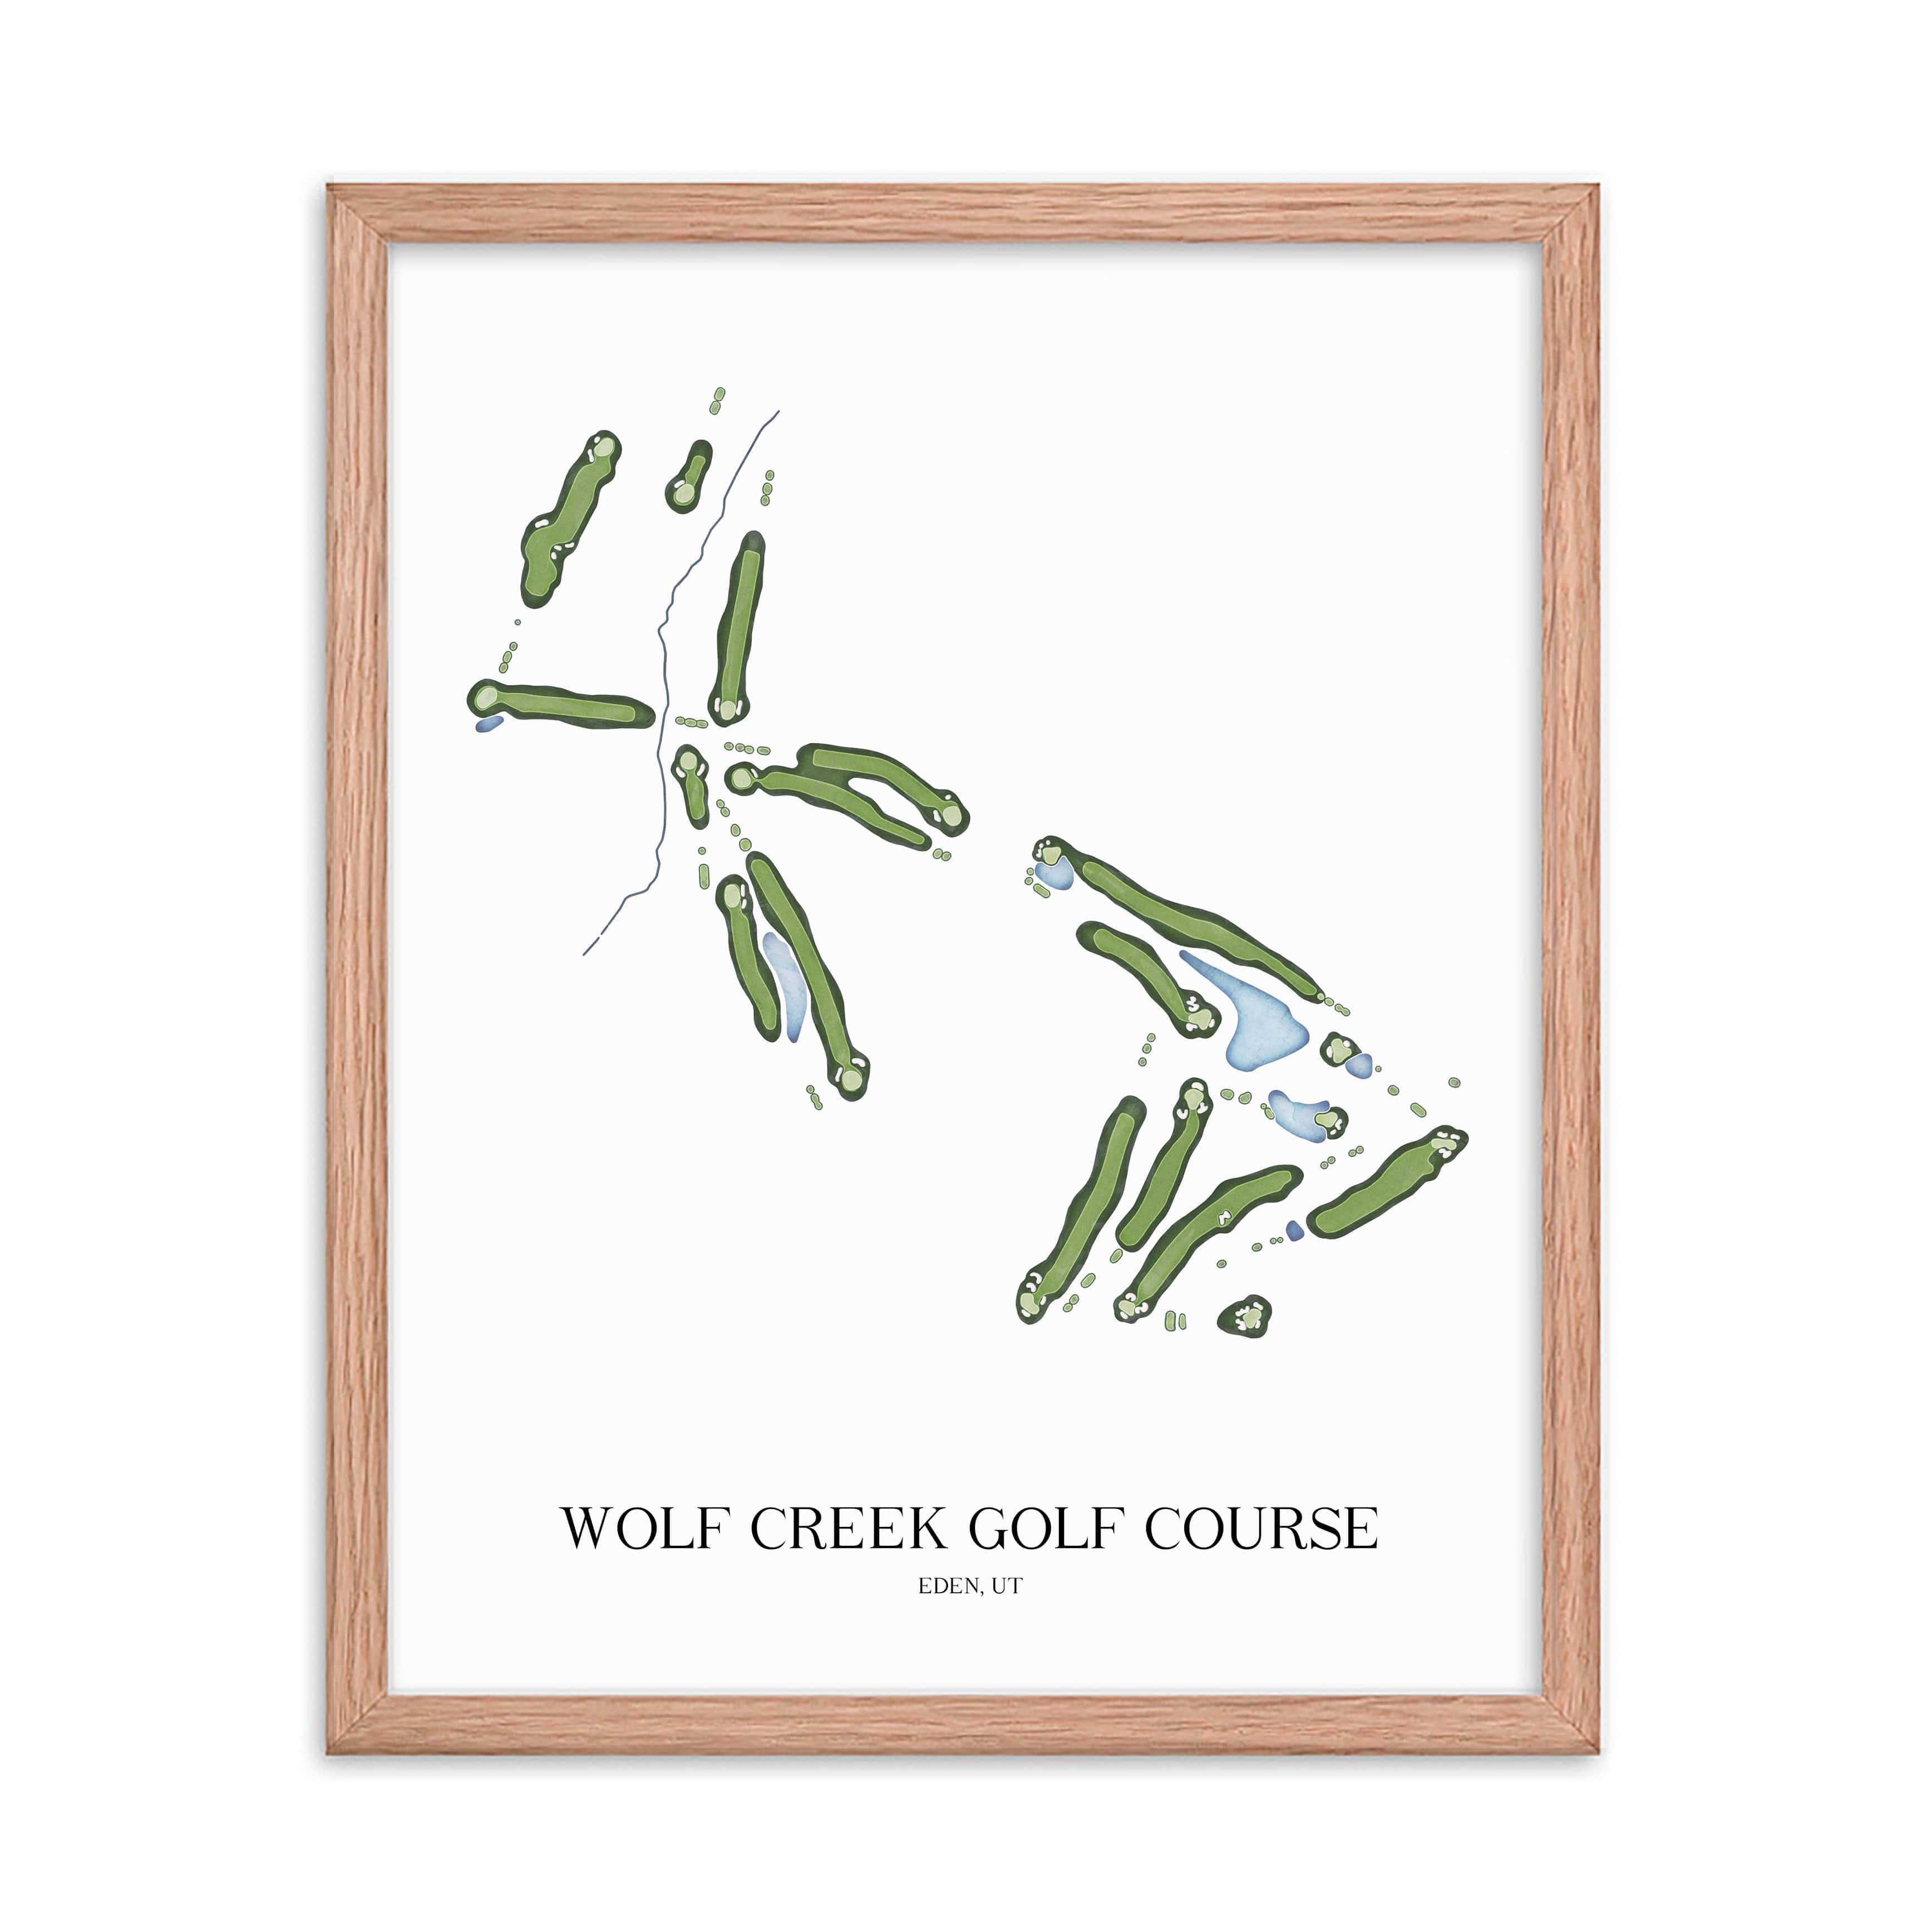 The 19th Hole Golf Shop - Golf Course Prints -  Wolf Creek Golf Course Golf Course Map